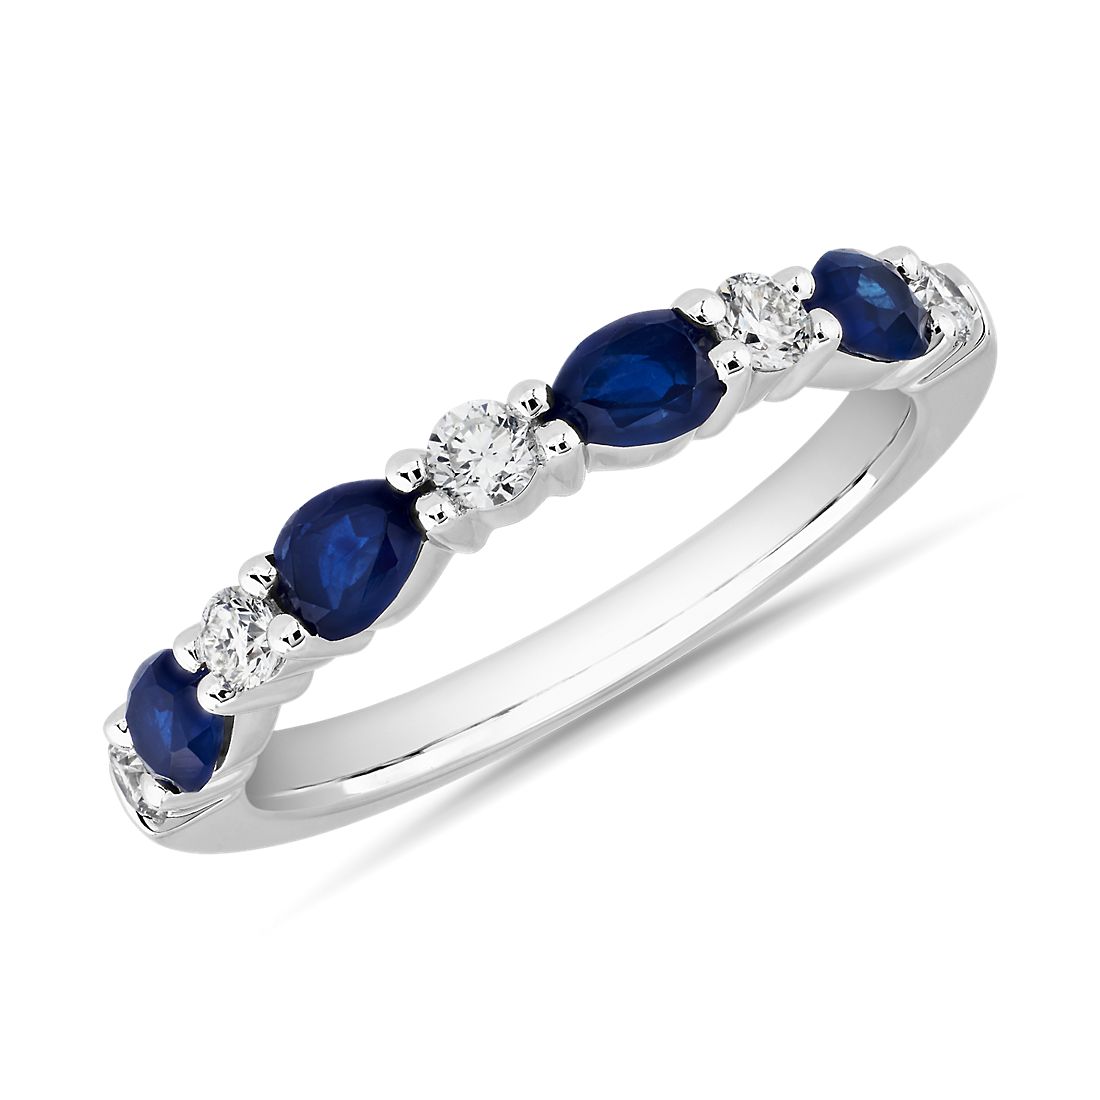 Alternating Pear Sapphire and Diamond Anniversary Ring in 14k White Gold (0.19 ct. tw.)